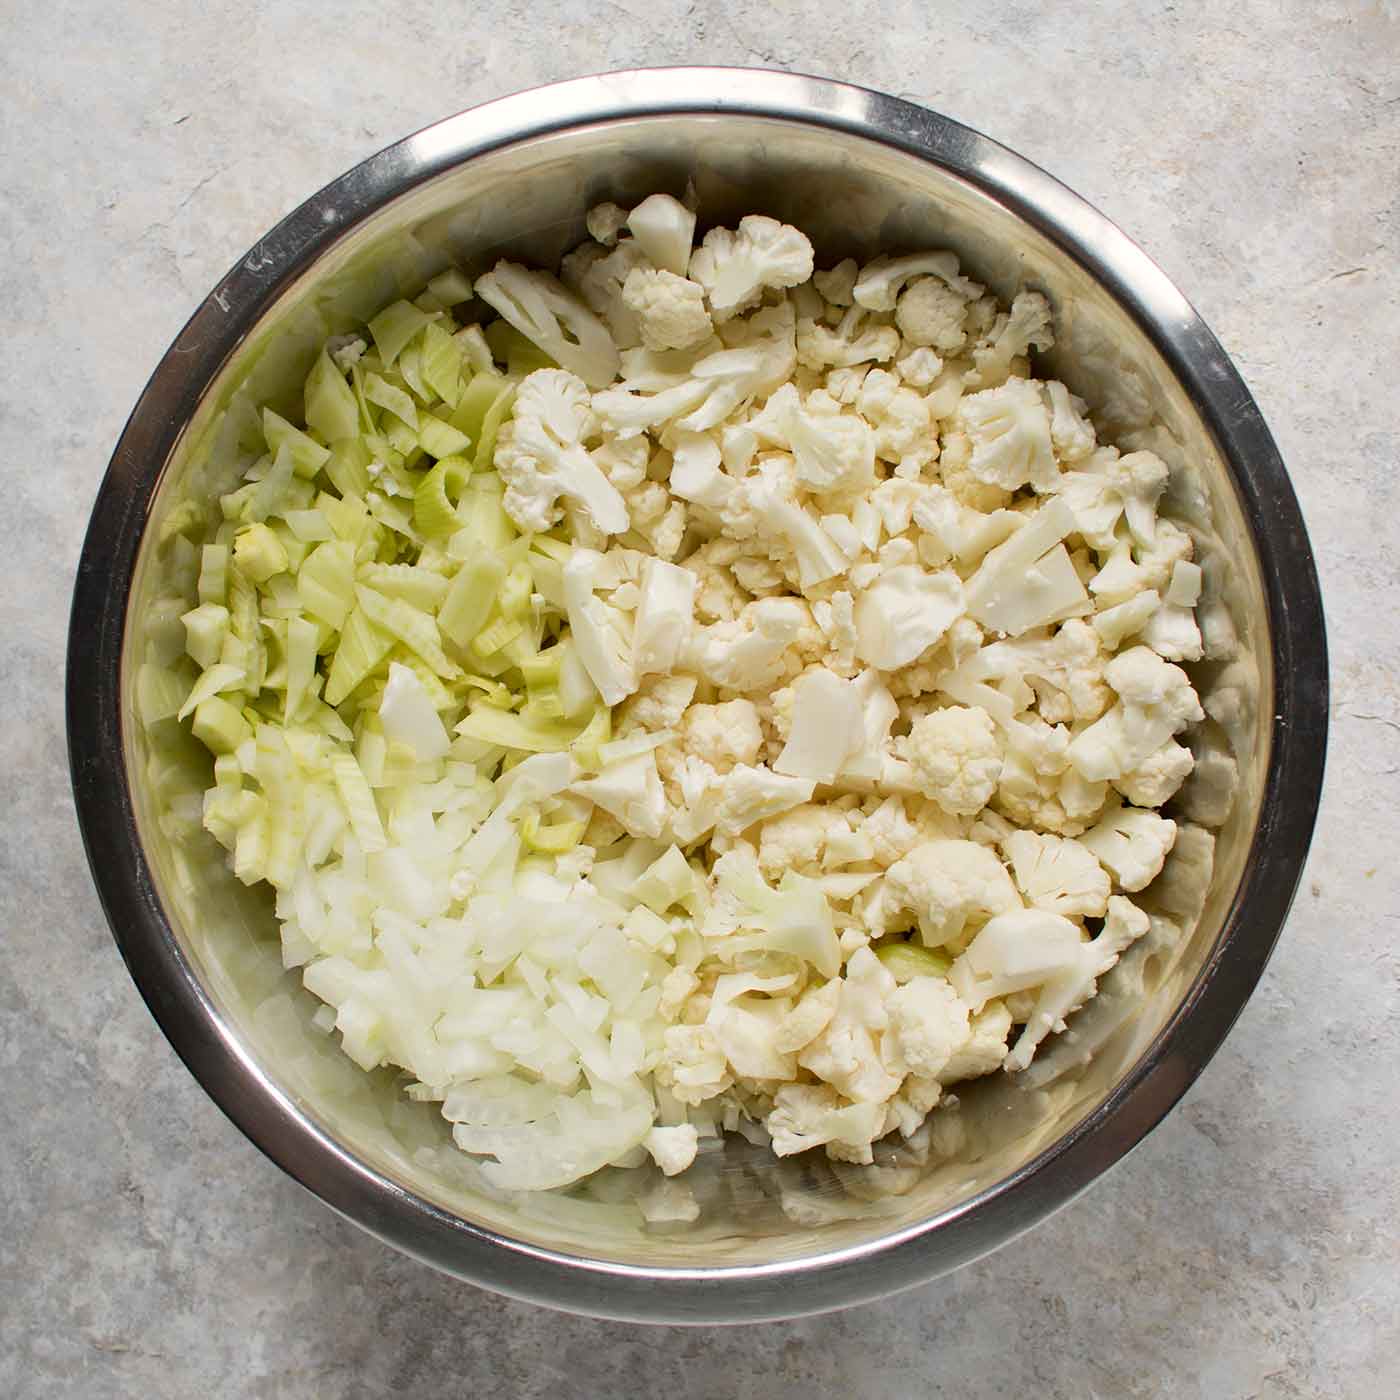 Ingredients for cauliflower fennel soup in a mixing bowl.